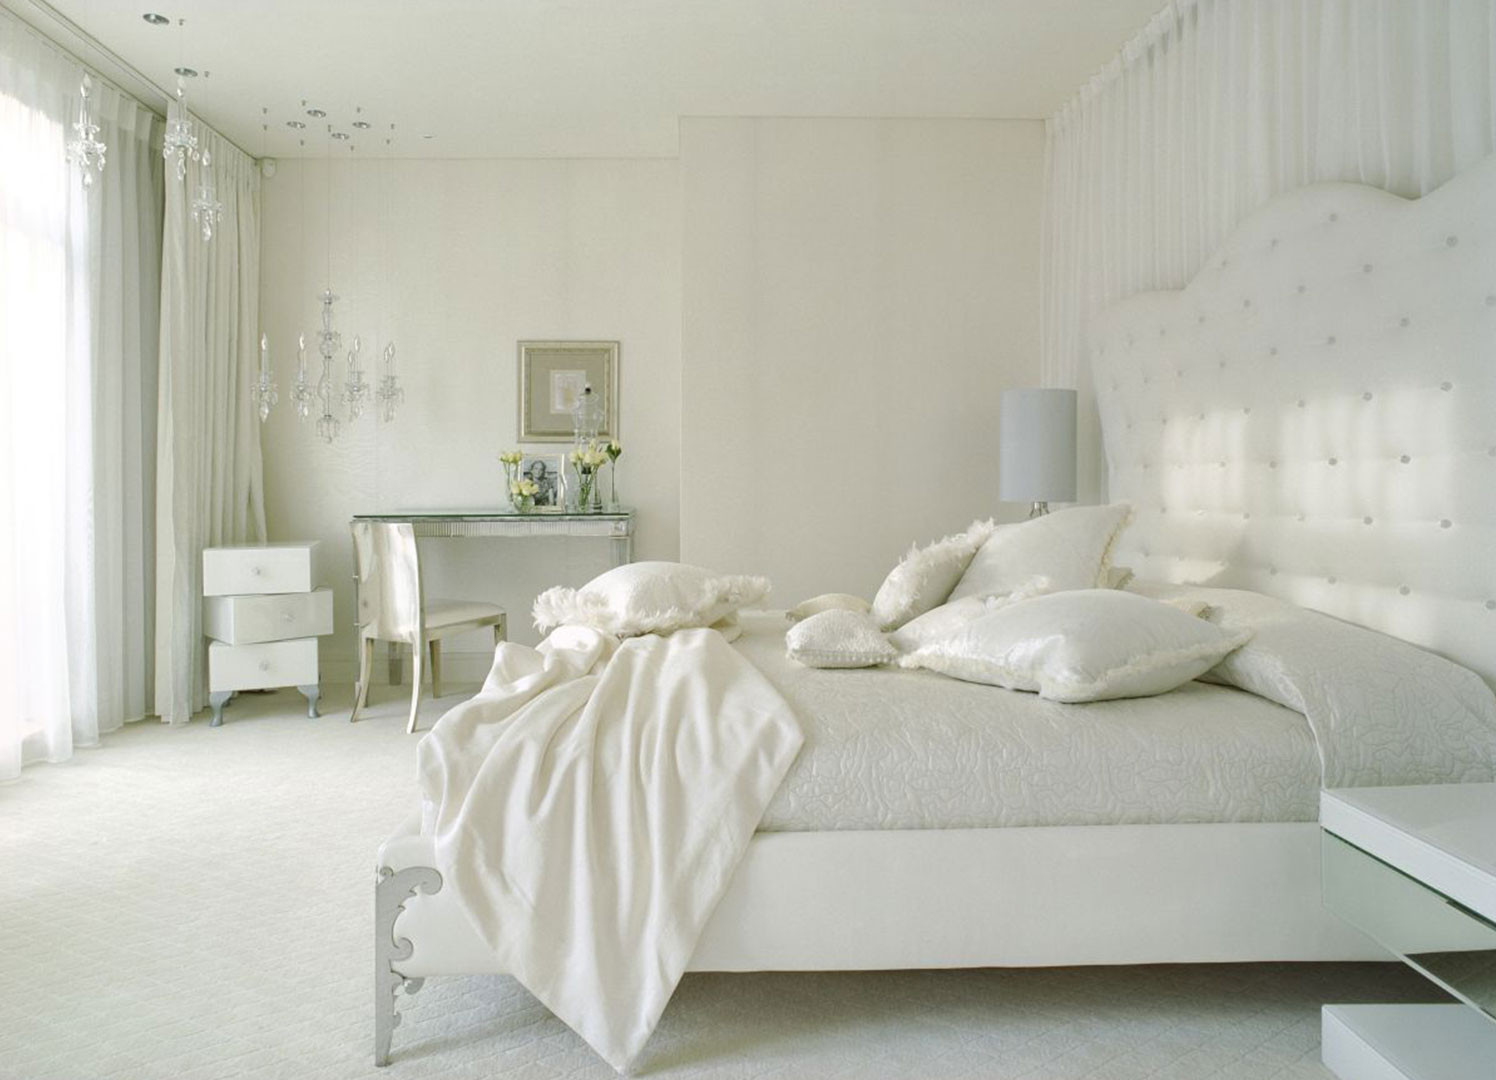 White Bedroom Decorating Ideas
 30 White Bedroom Ideas For Your Home – The WoW Style